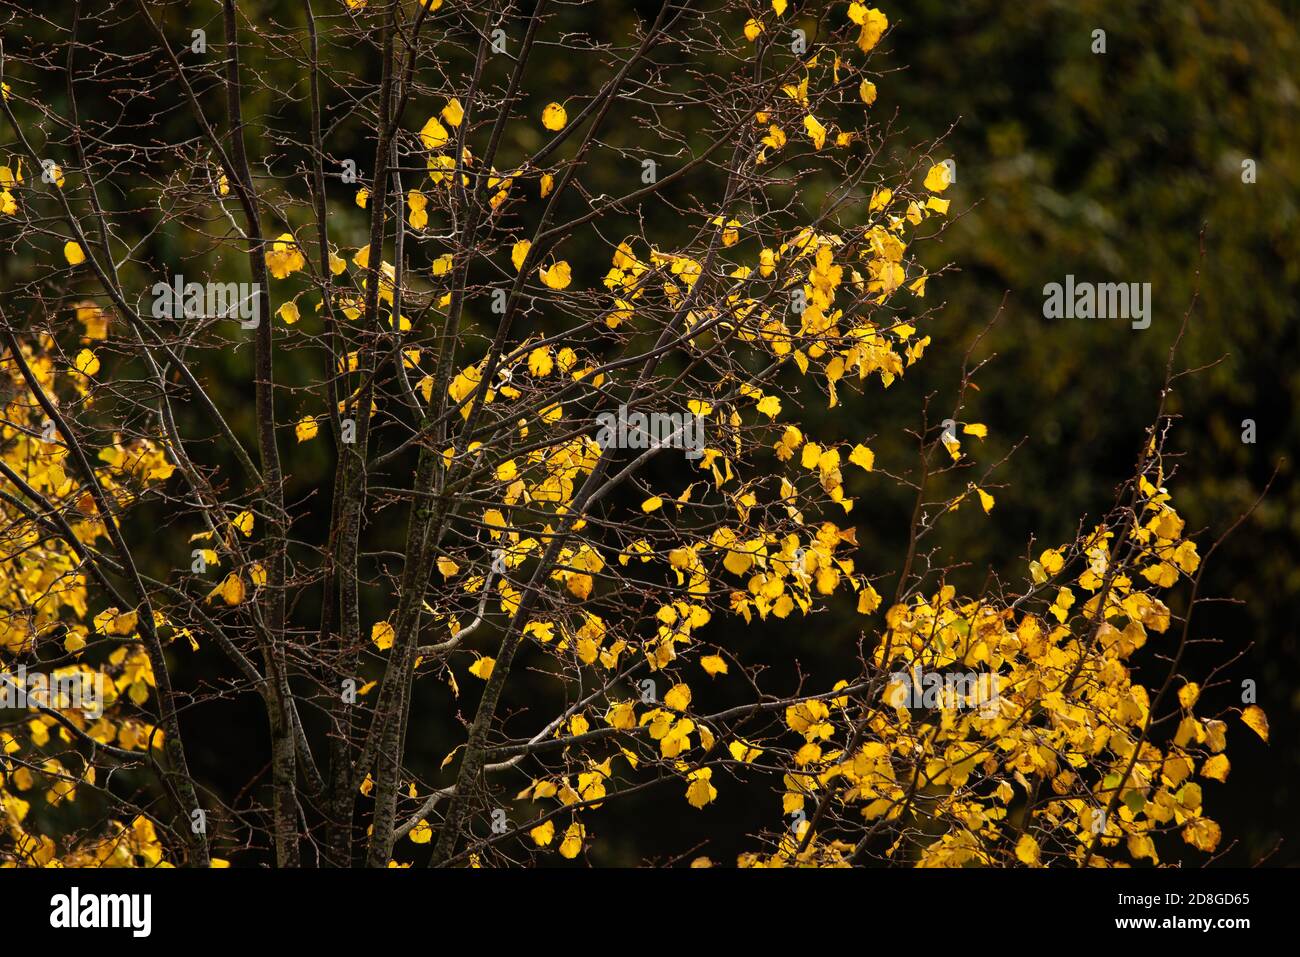 Beautiful tree losing the last of its colorful yellow fall leaves Stock Photo